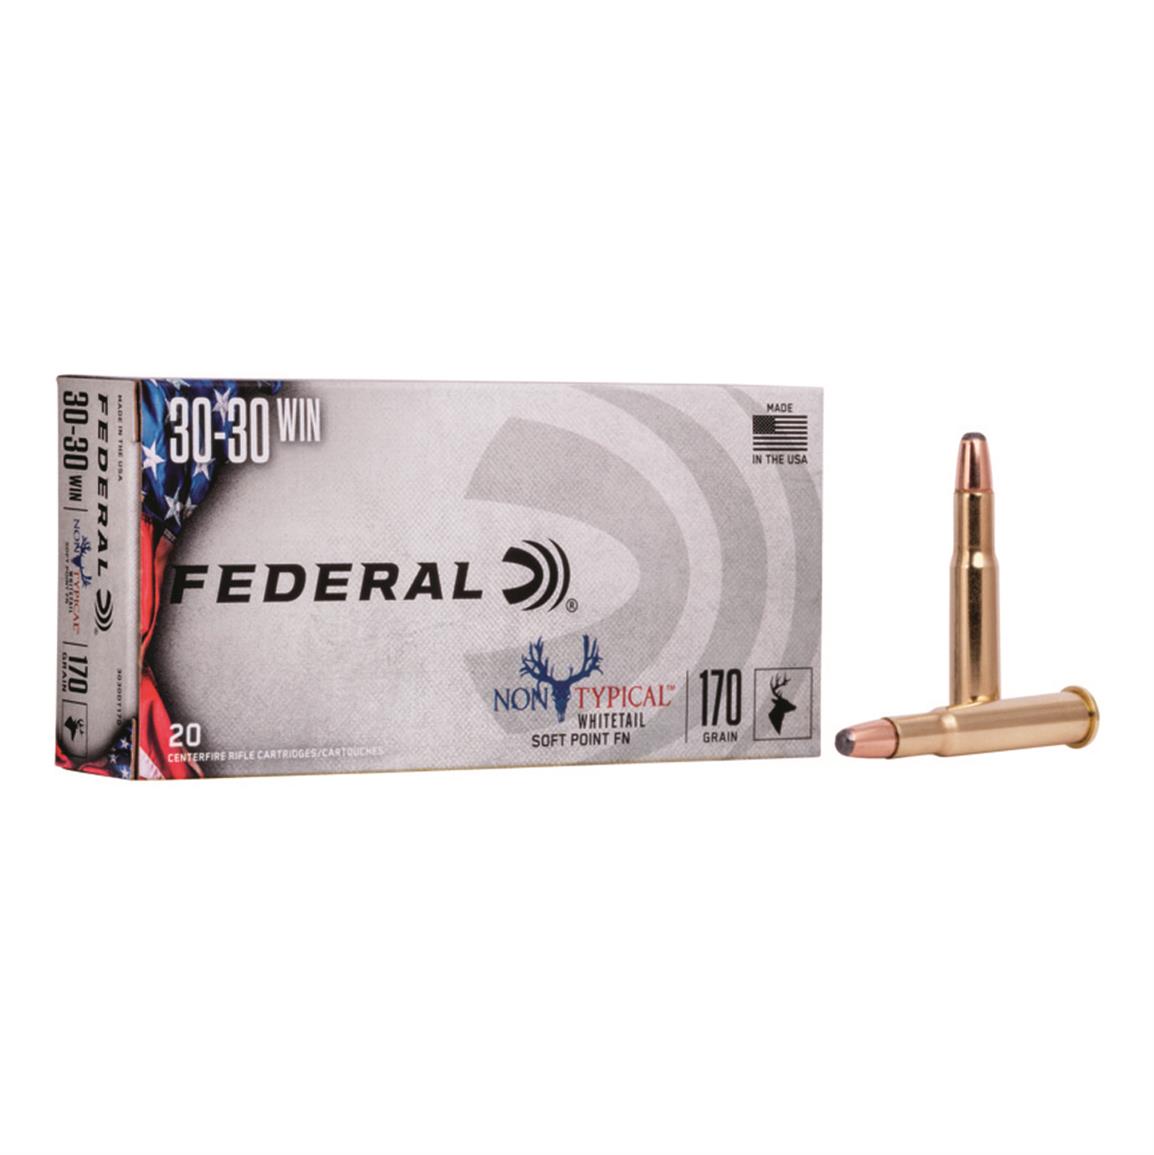 Federal Non-Typical, .30-30, SP, 170 Grain, 20 Rounds